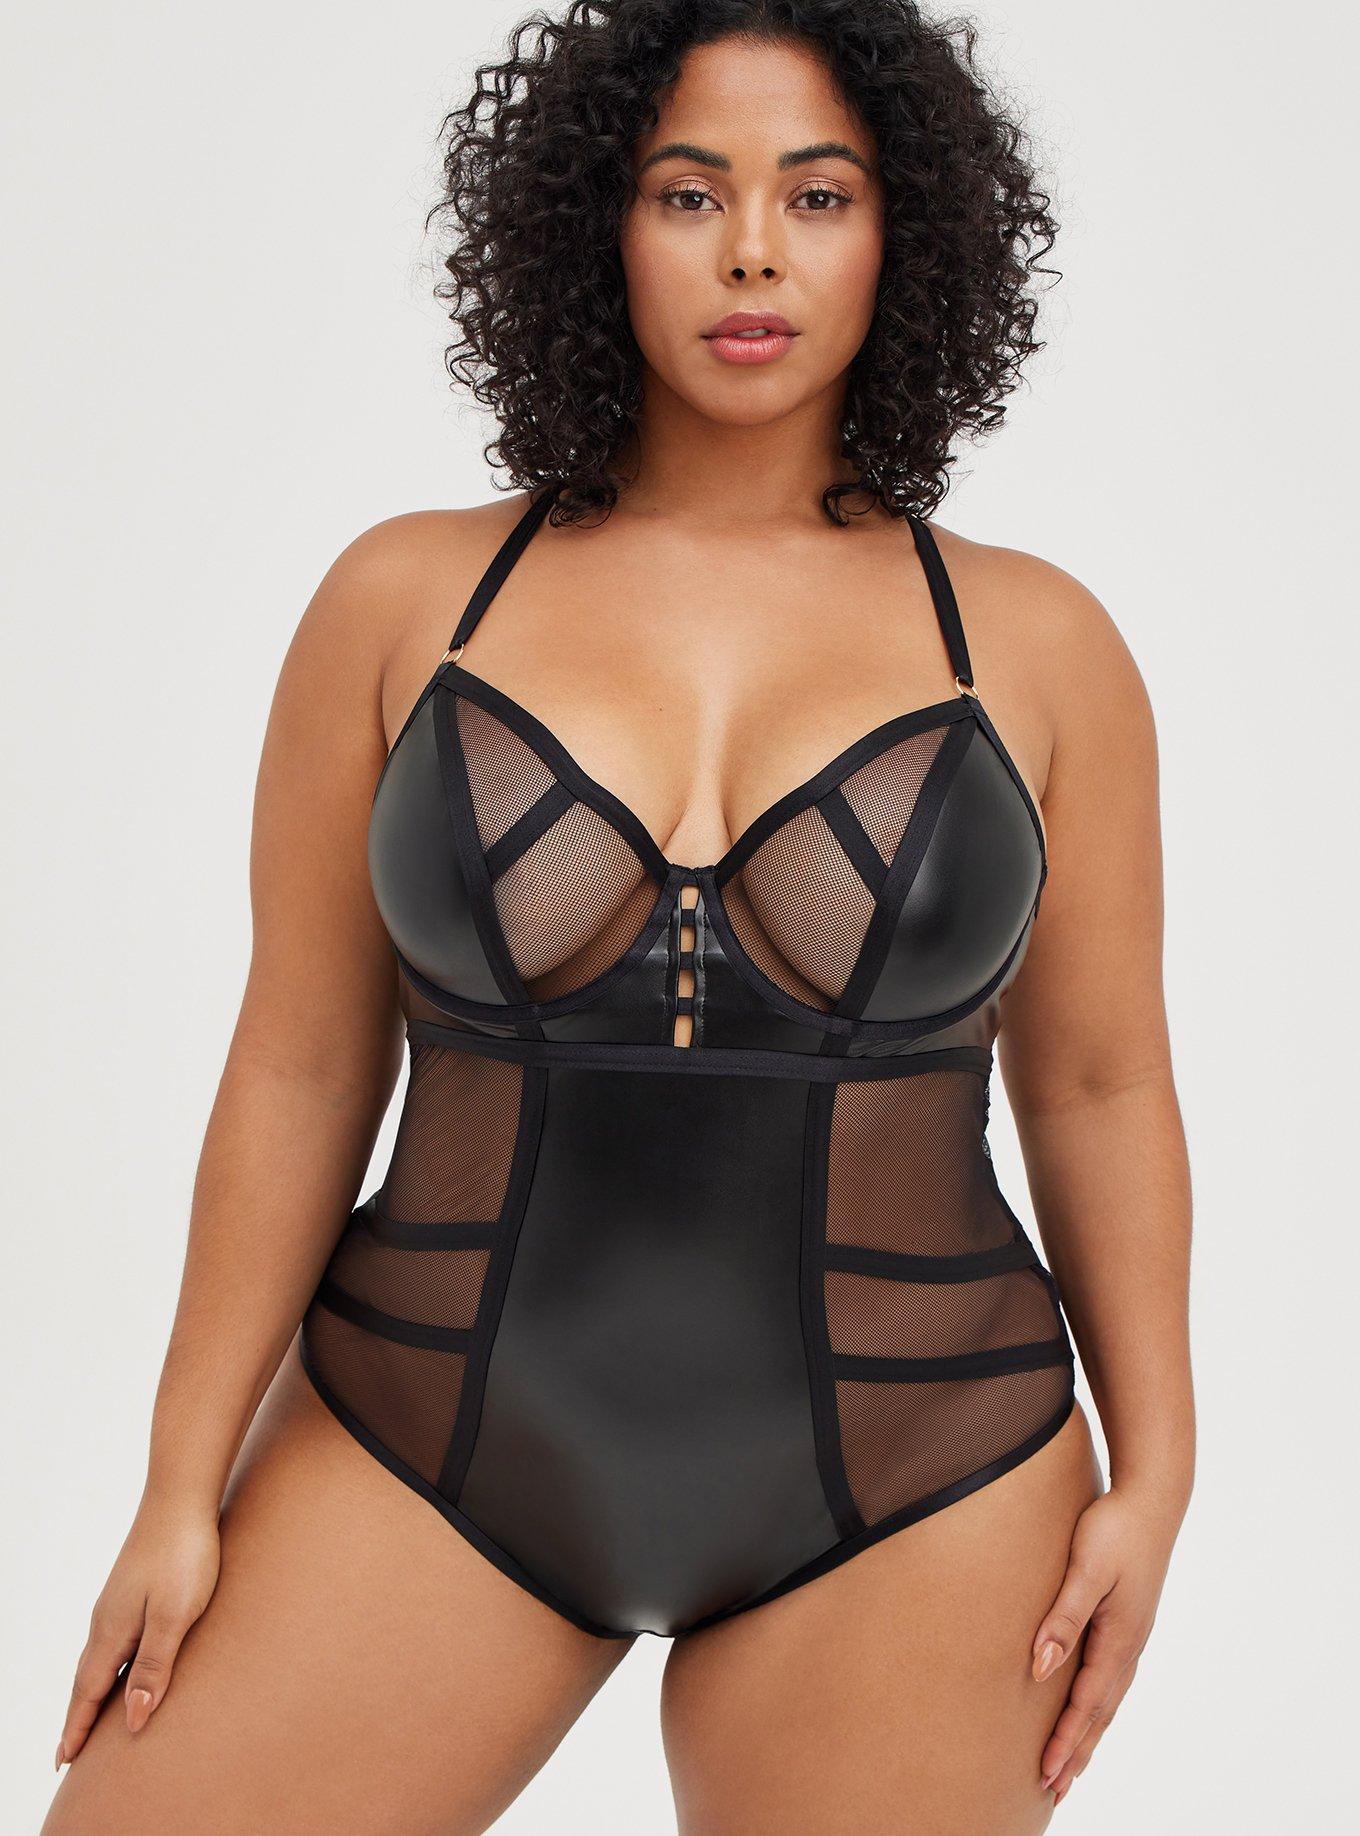 Black Lace Leatherette Bodysuit, Sheer Sexy Lingerie for Wedding